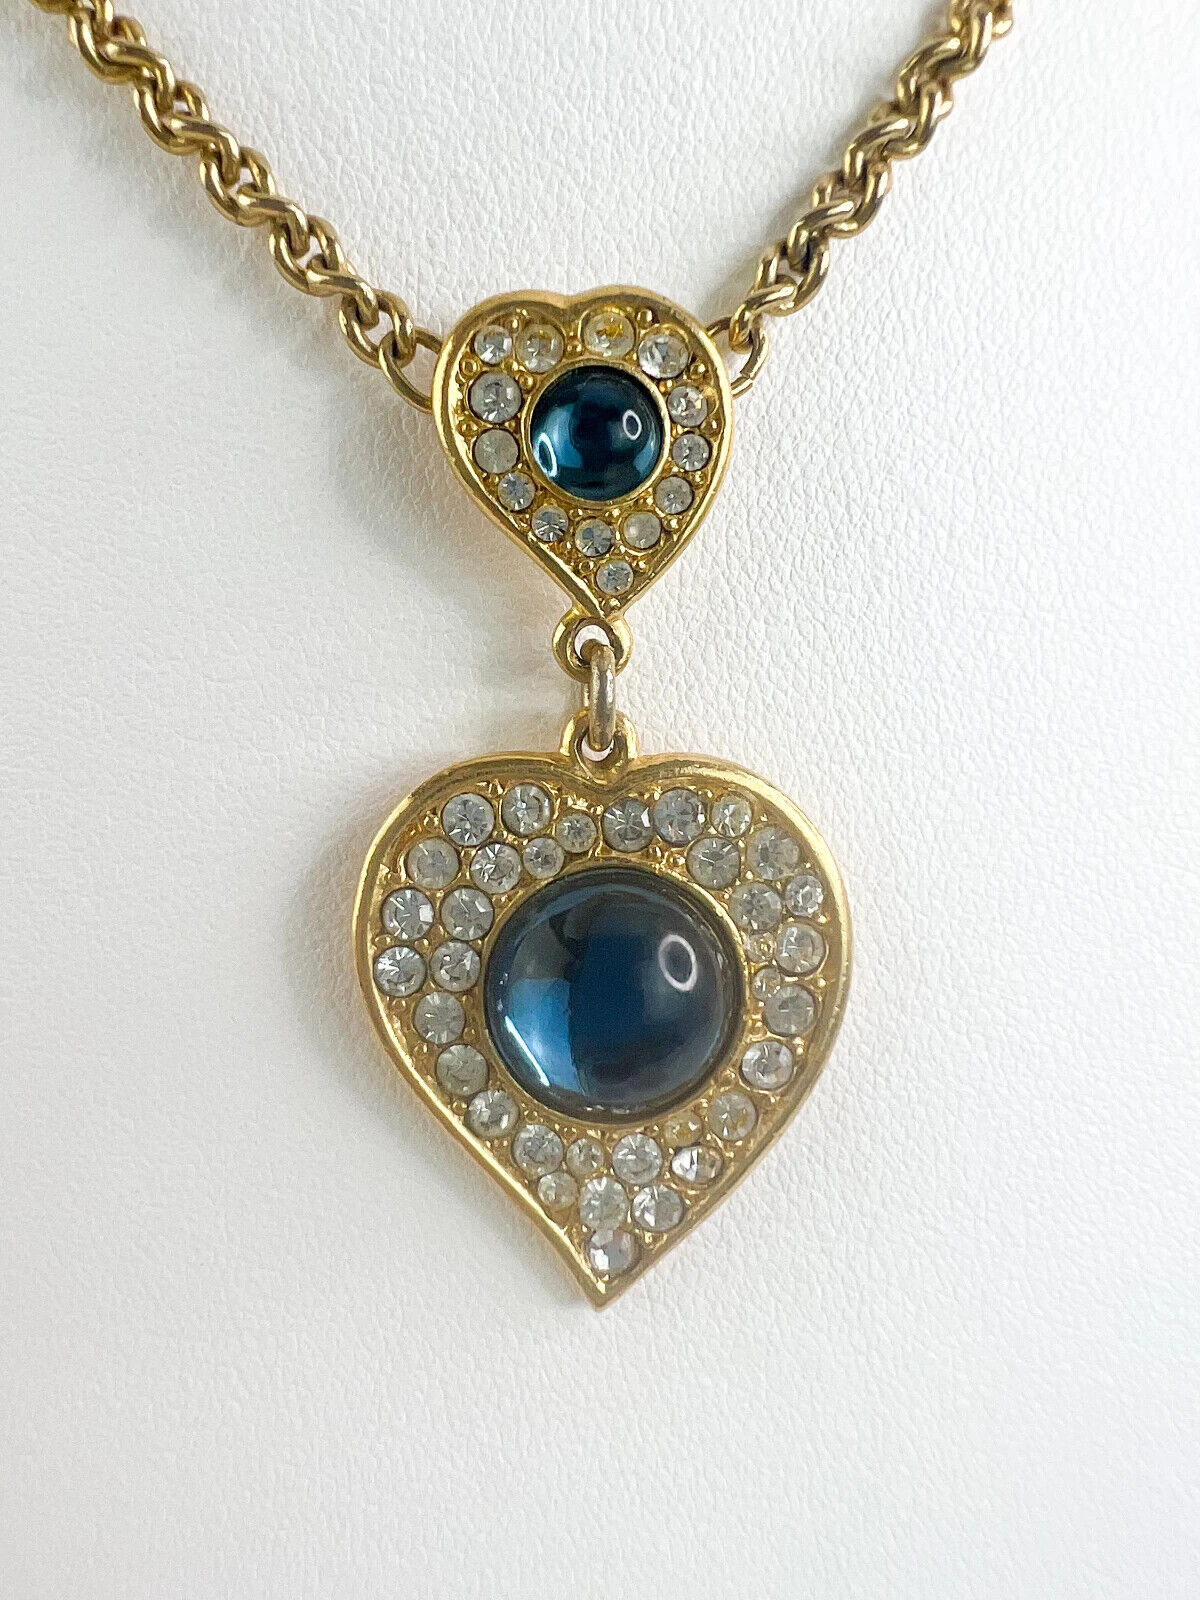 Yves Saint Laurent Necklace bridesmaid Vintage YSL necklace blue Sapphire heart, Women Charm Necklace, Bridal Jewelry, Wedding Jewelry